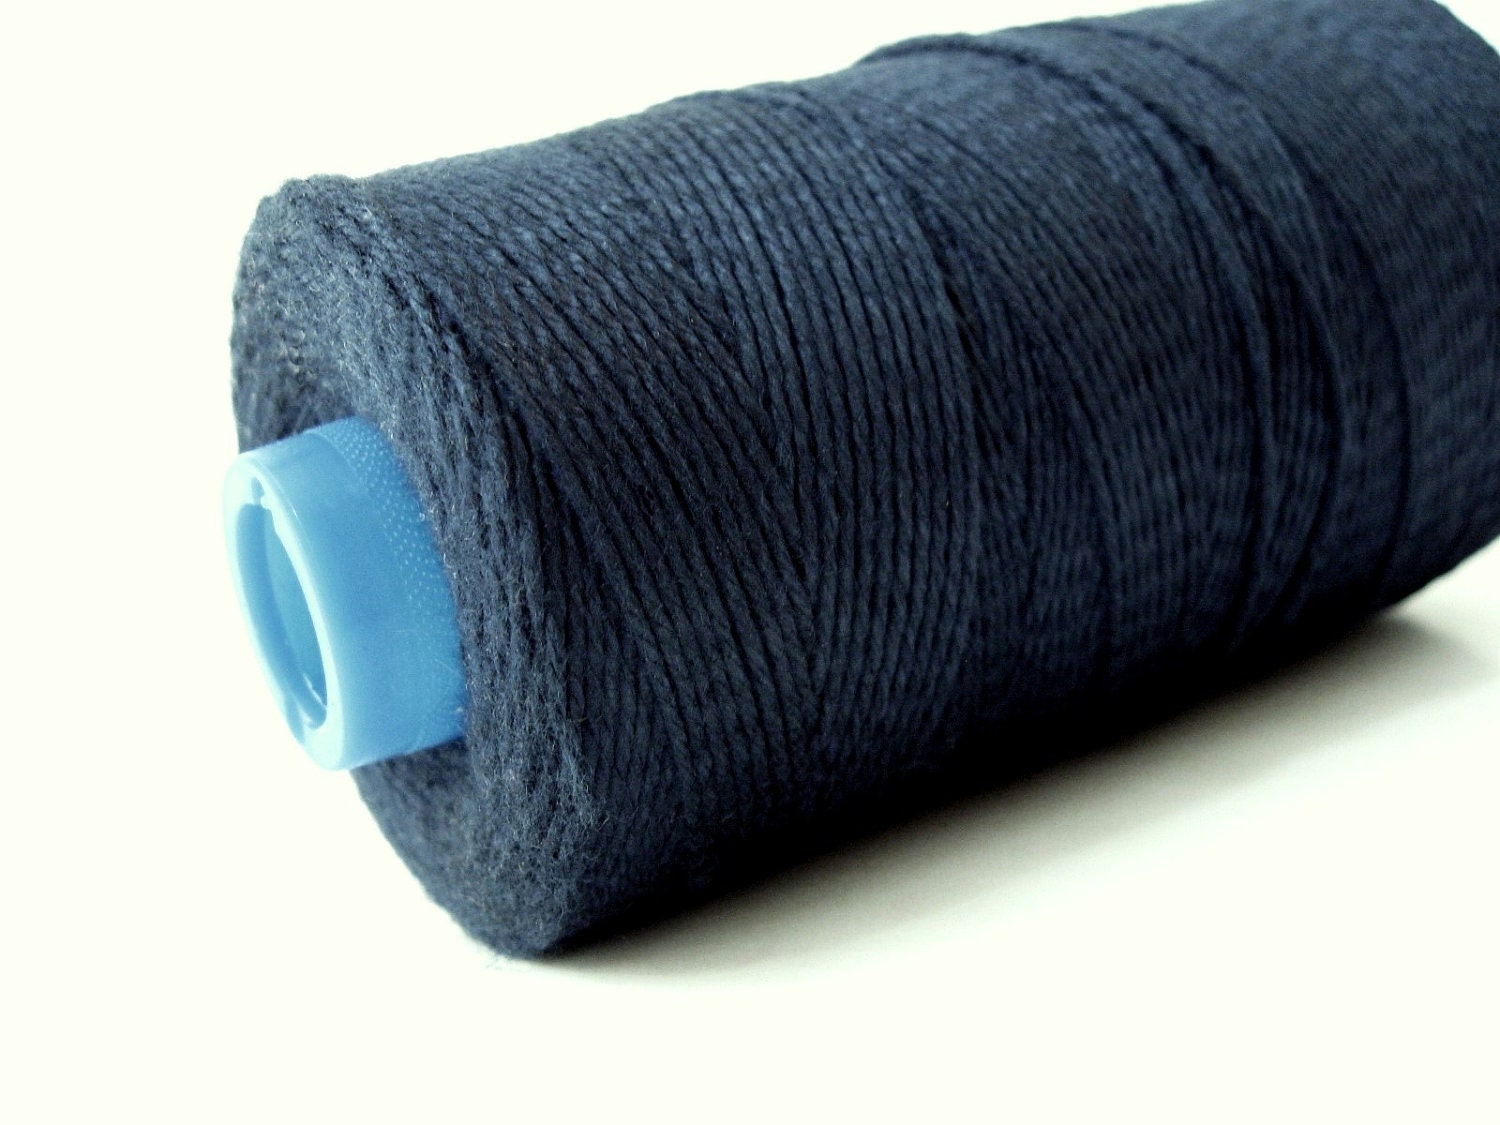 Dark Blue Bamboo Cord 1mm - 10 meters / 32.8 ft  (C2) - AnnyMayCraftSupplies